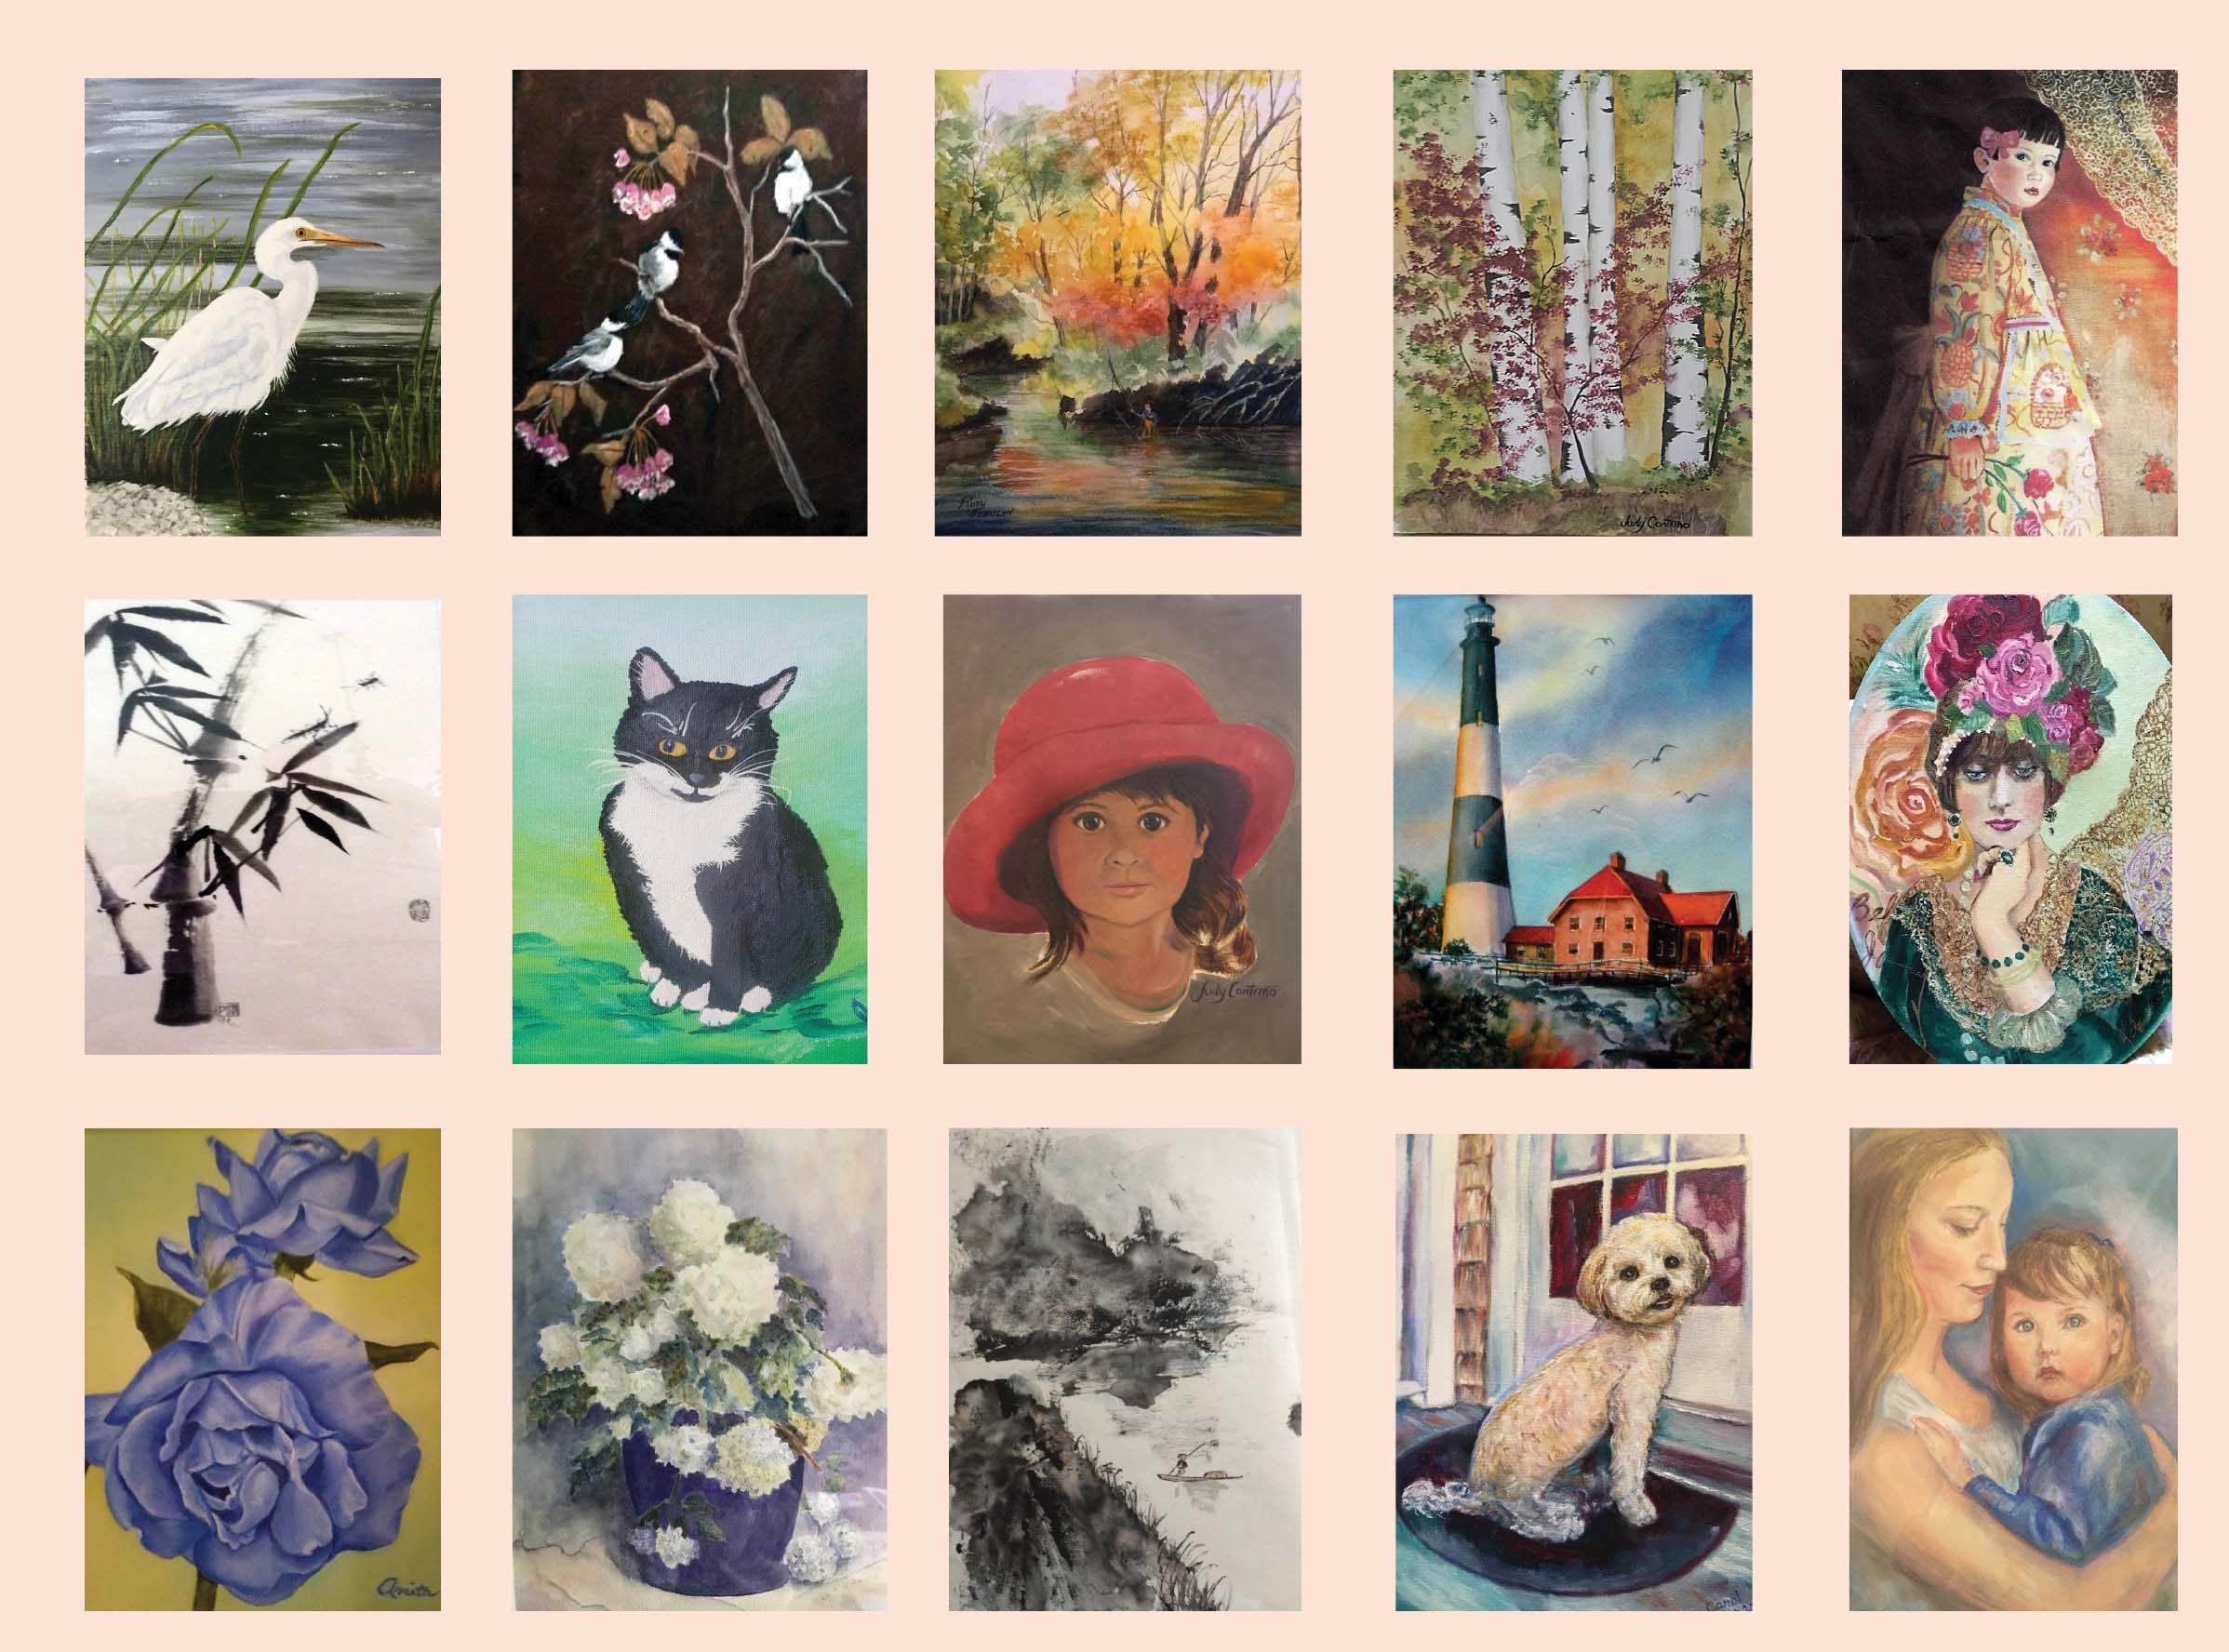 Sample art collage from participating artists